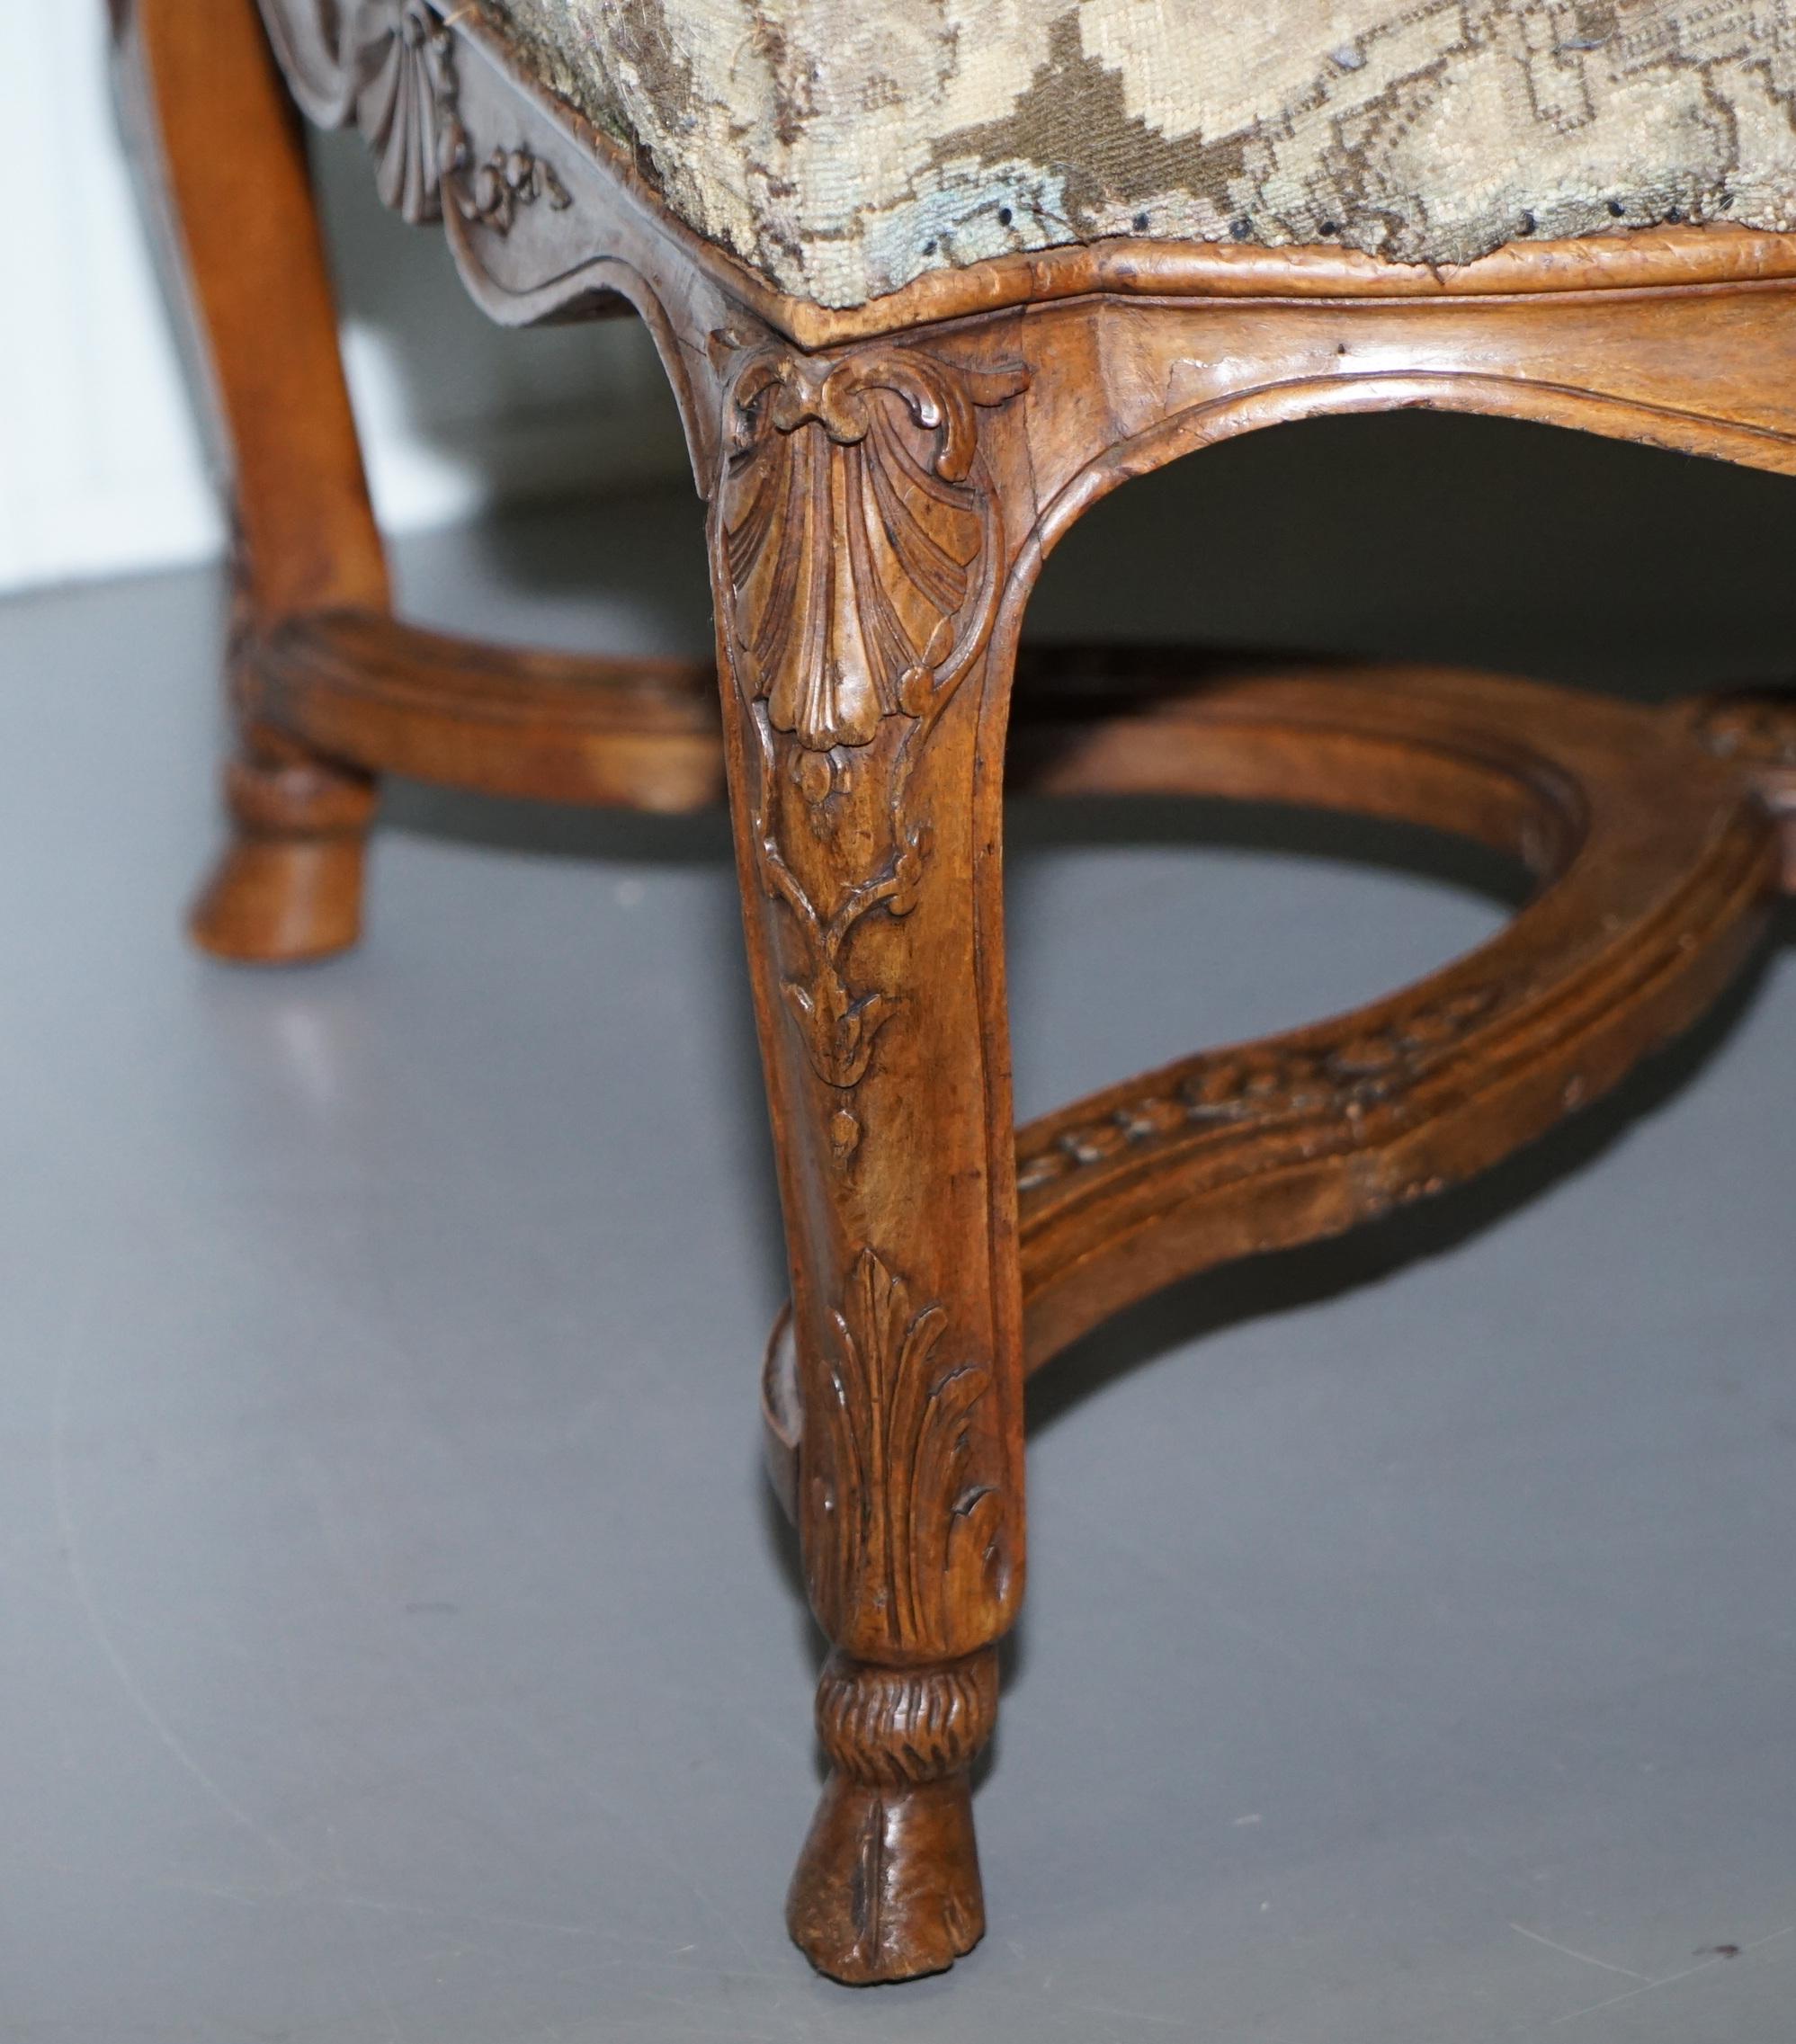 Rare 19th Century French Embroidered Armchair Ornately Carved Frame High Back For Sale 6